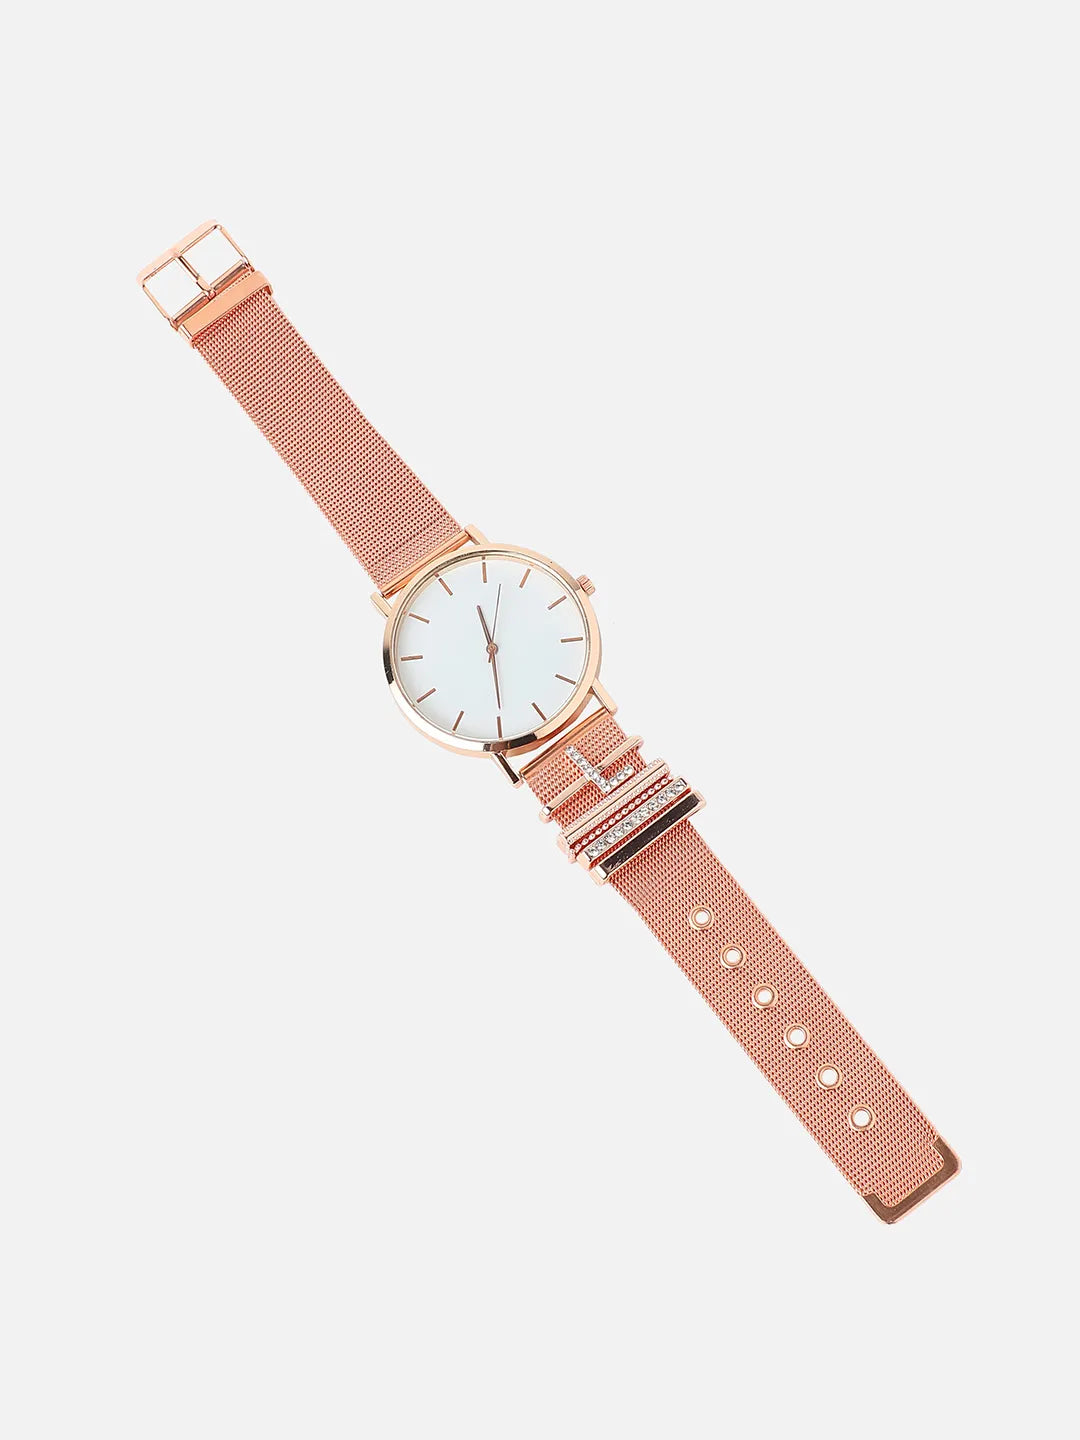 Round Analog Watch With L Initial Watch Charm - Rose Gold